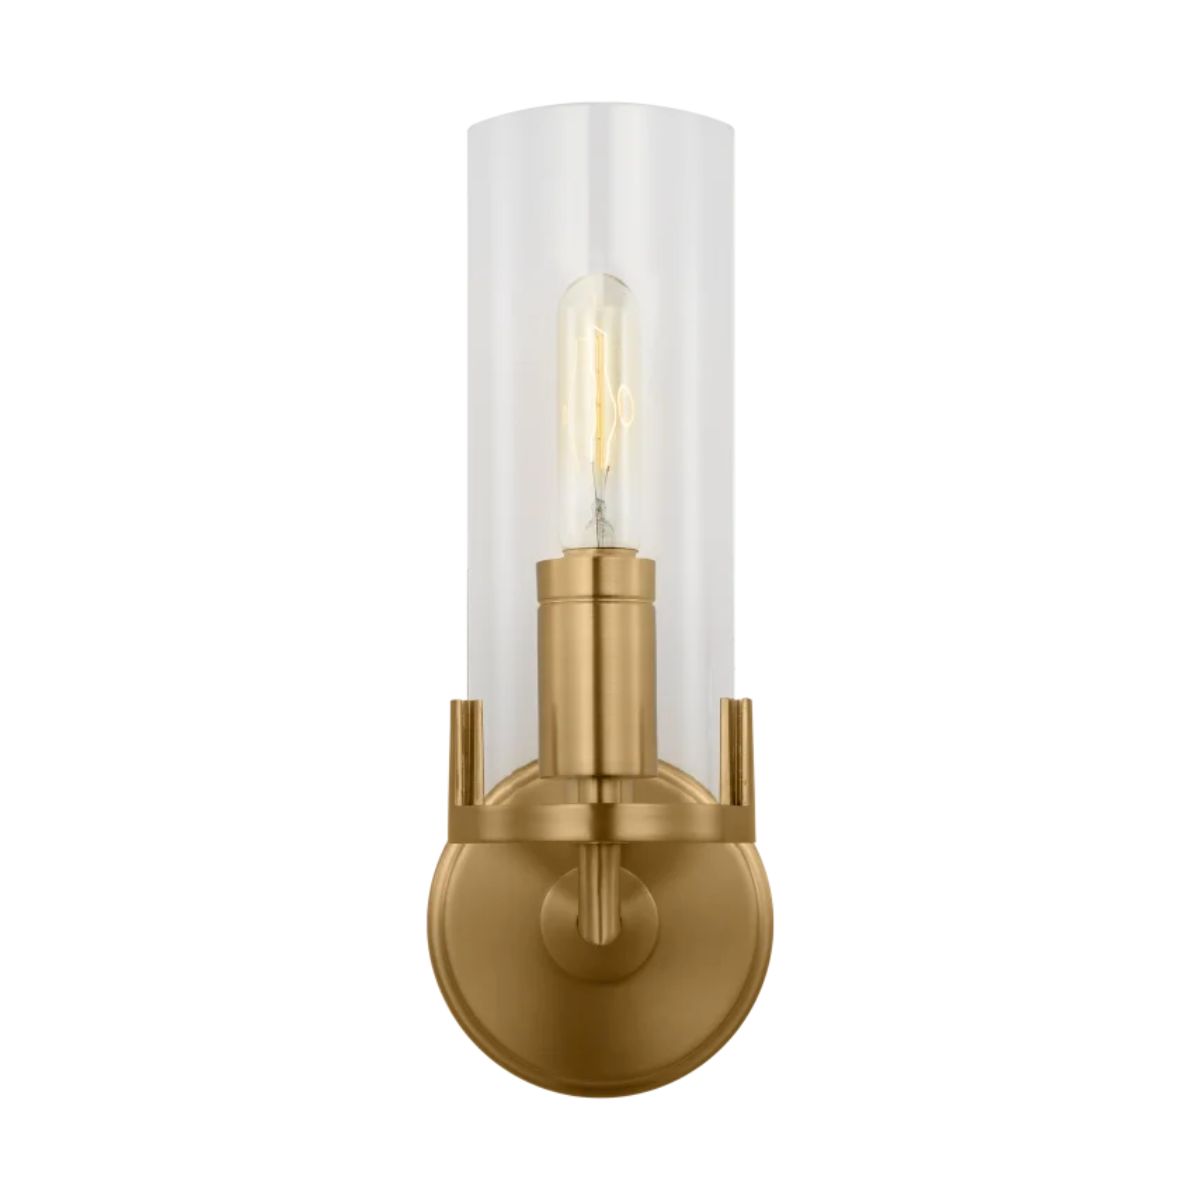 Mezzo 14 in. Armed Sconce Brushed Brass Finish - Bees Lighting